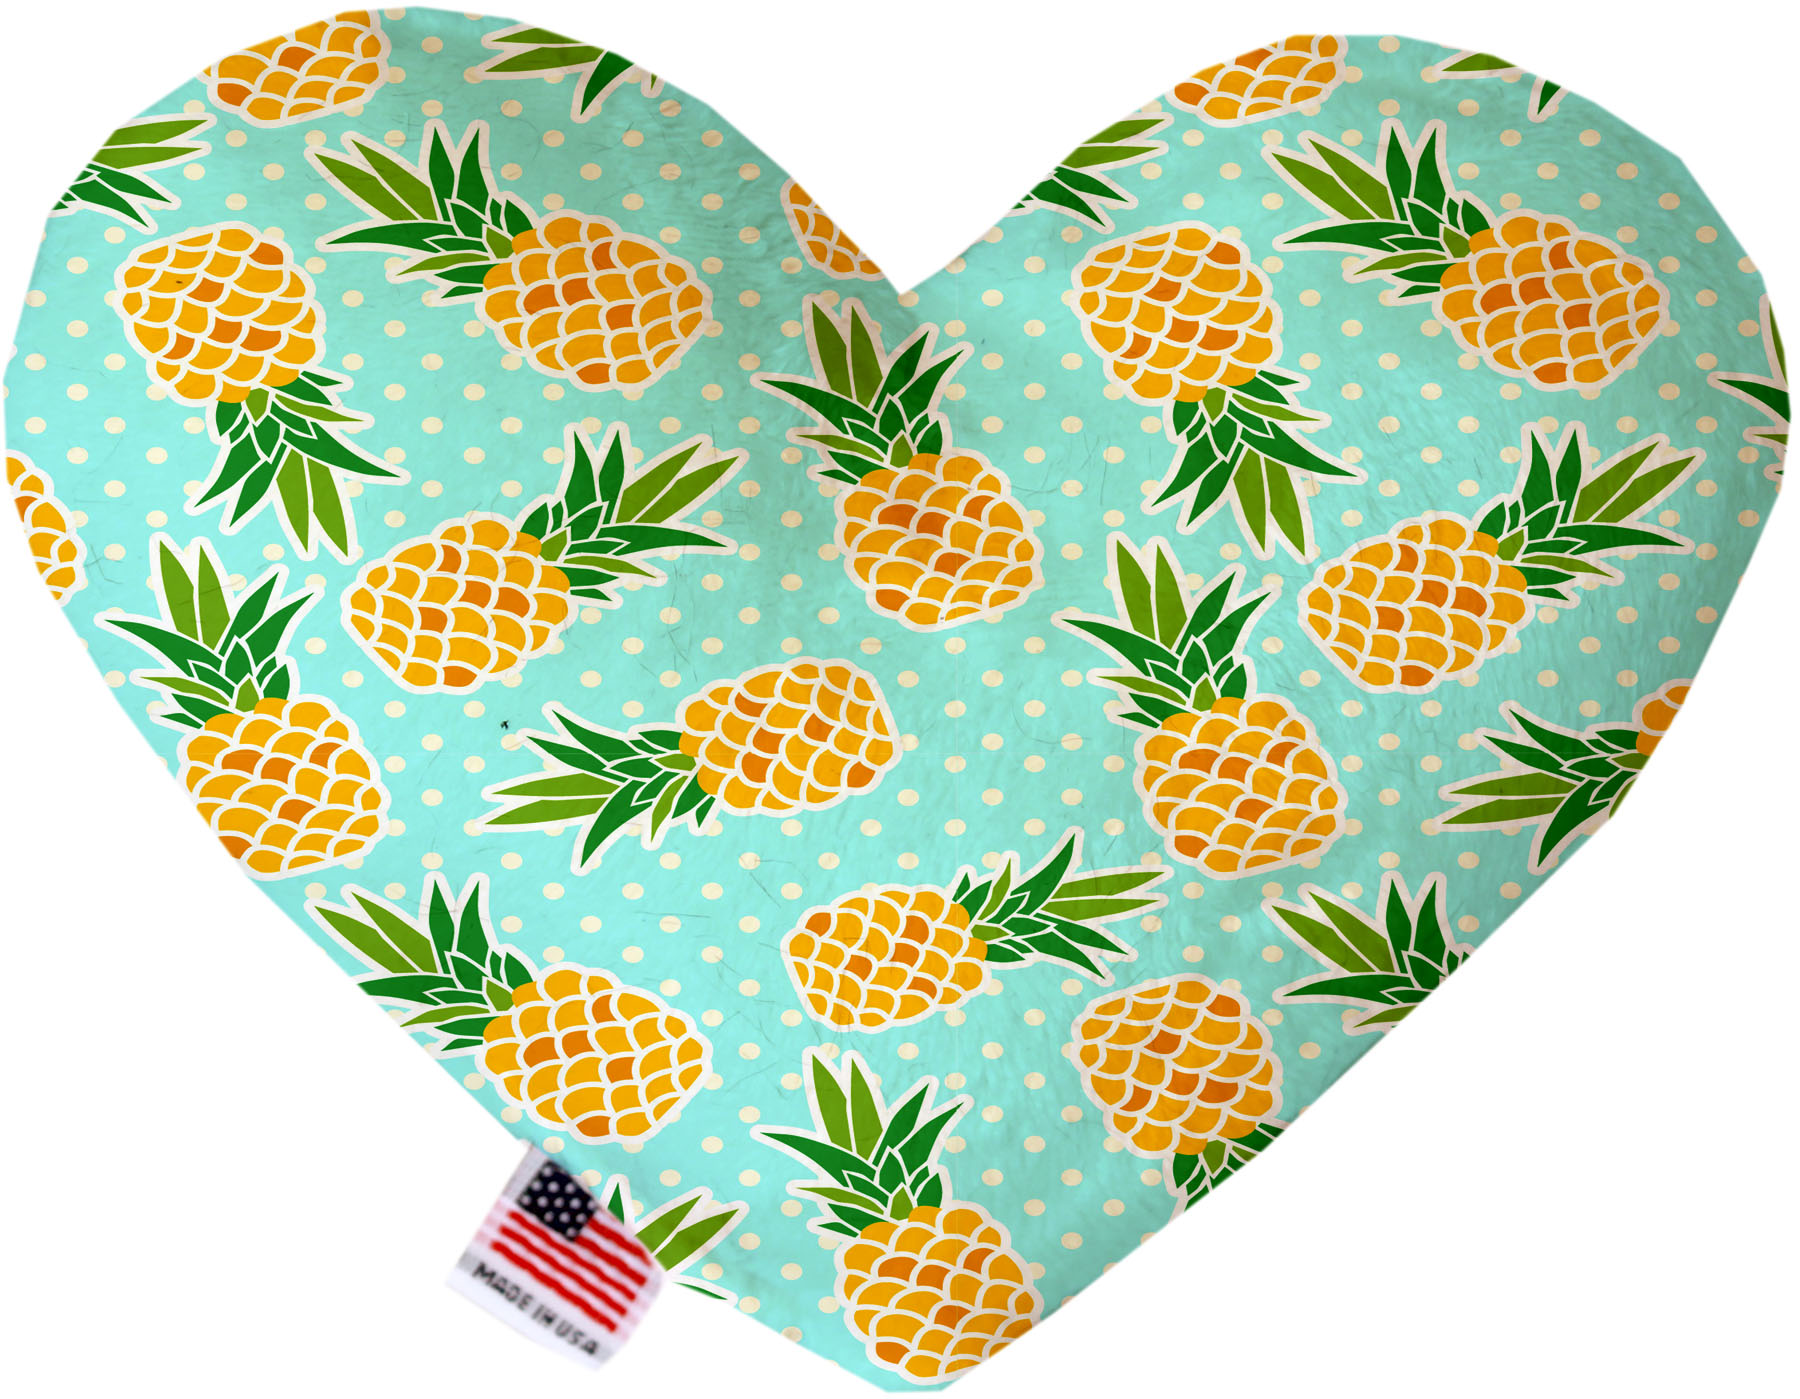 Pineapples and Polka Dots 6 inch Canvas Heart Dog Toy